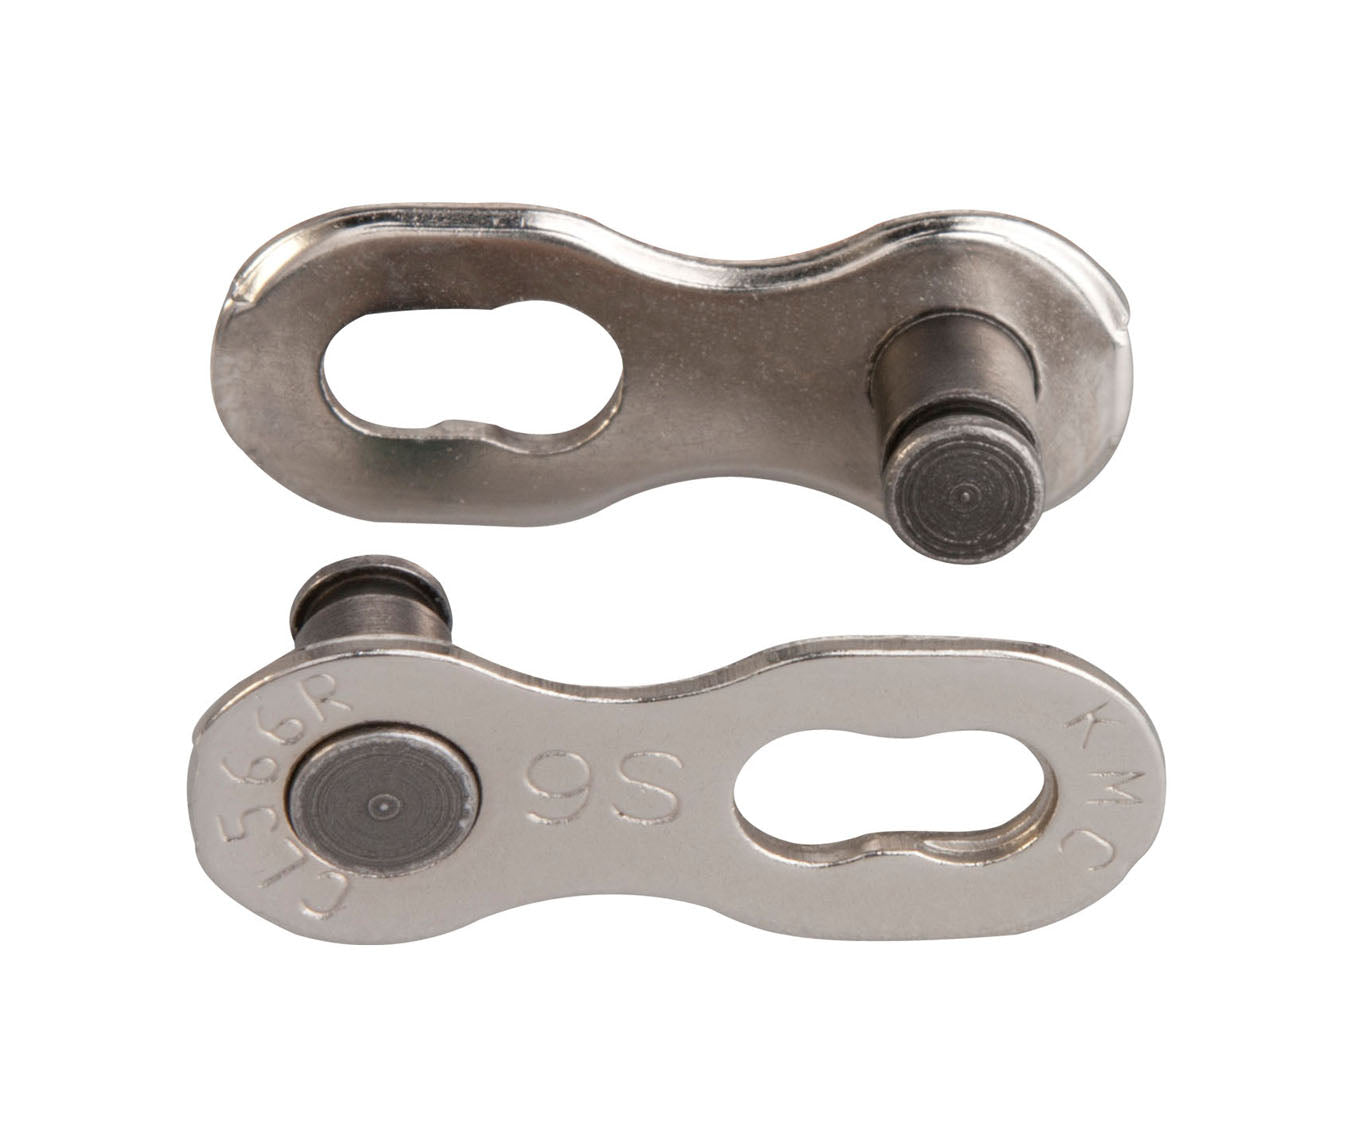 KMC spare connector 9 Speed Chain (Silver)